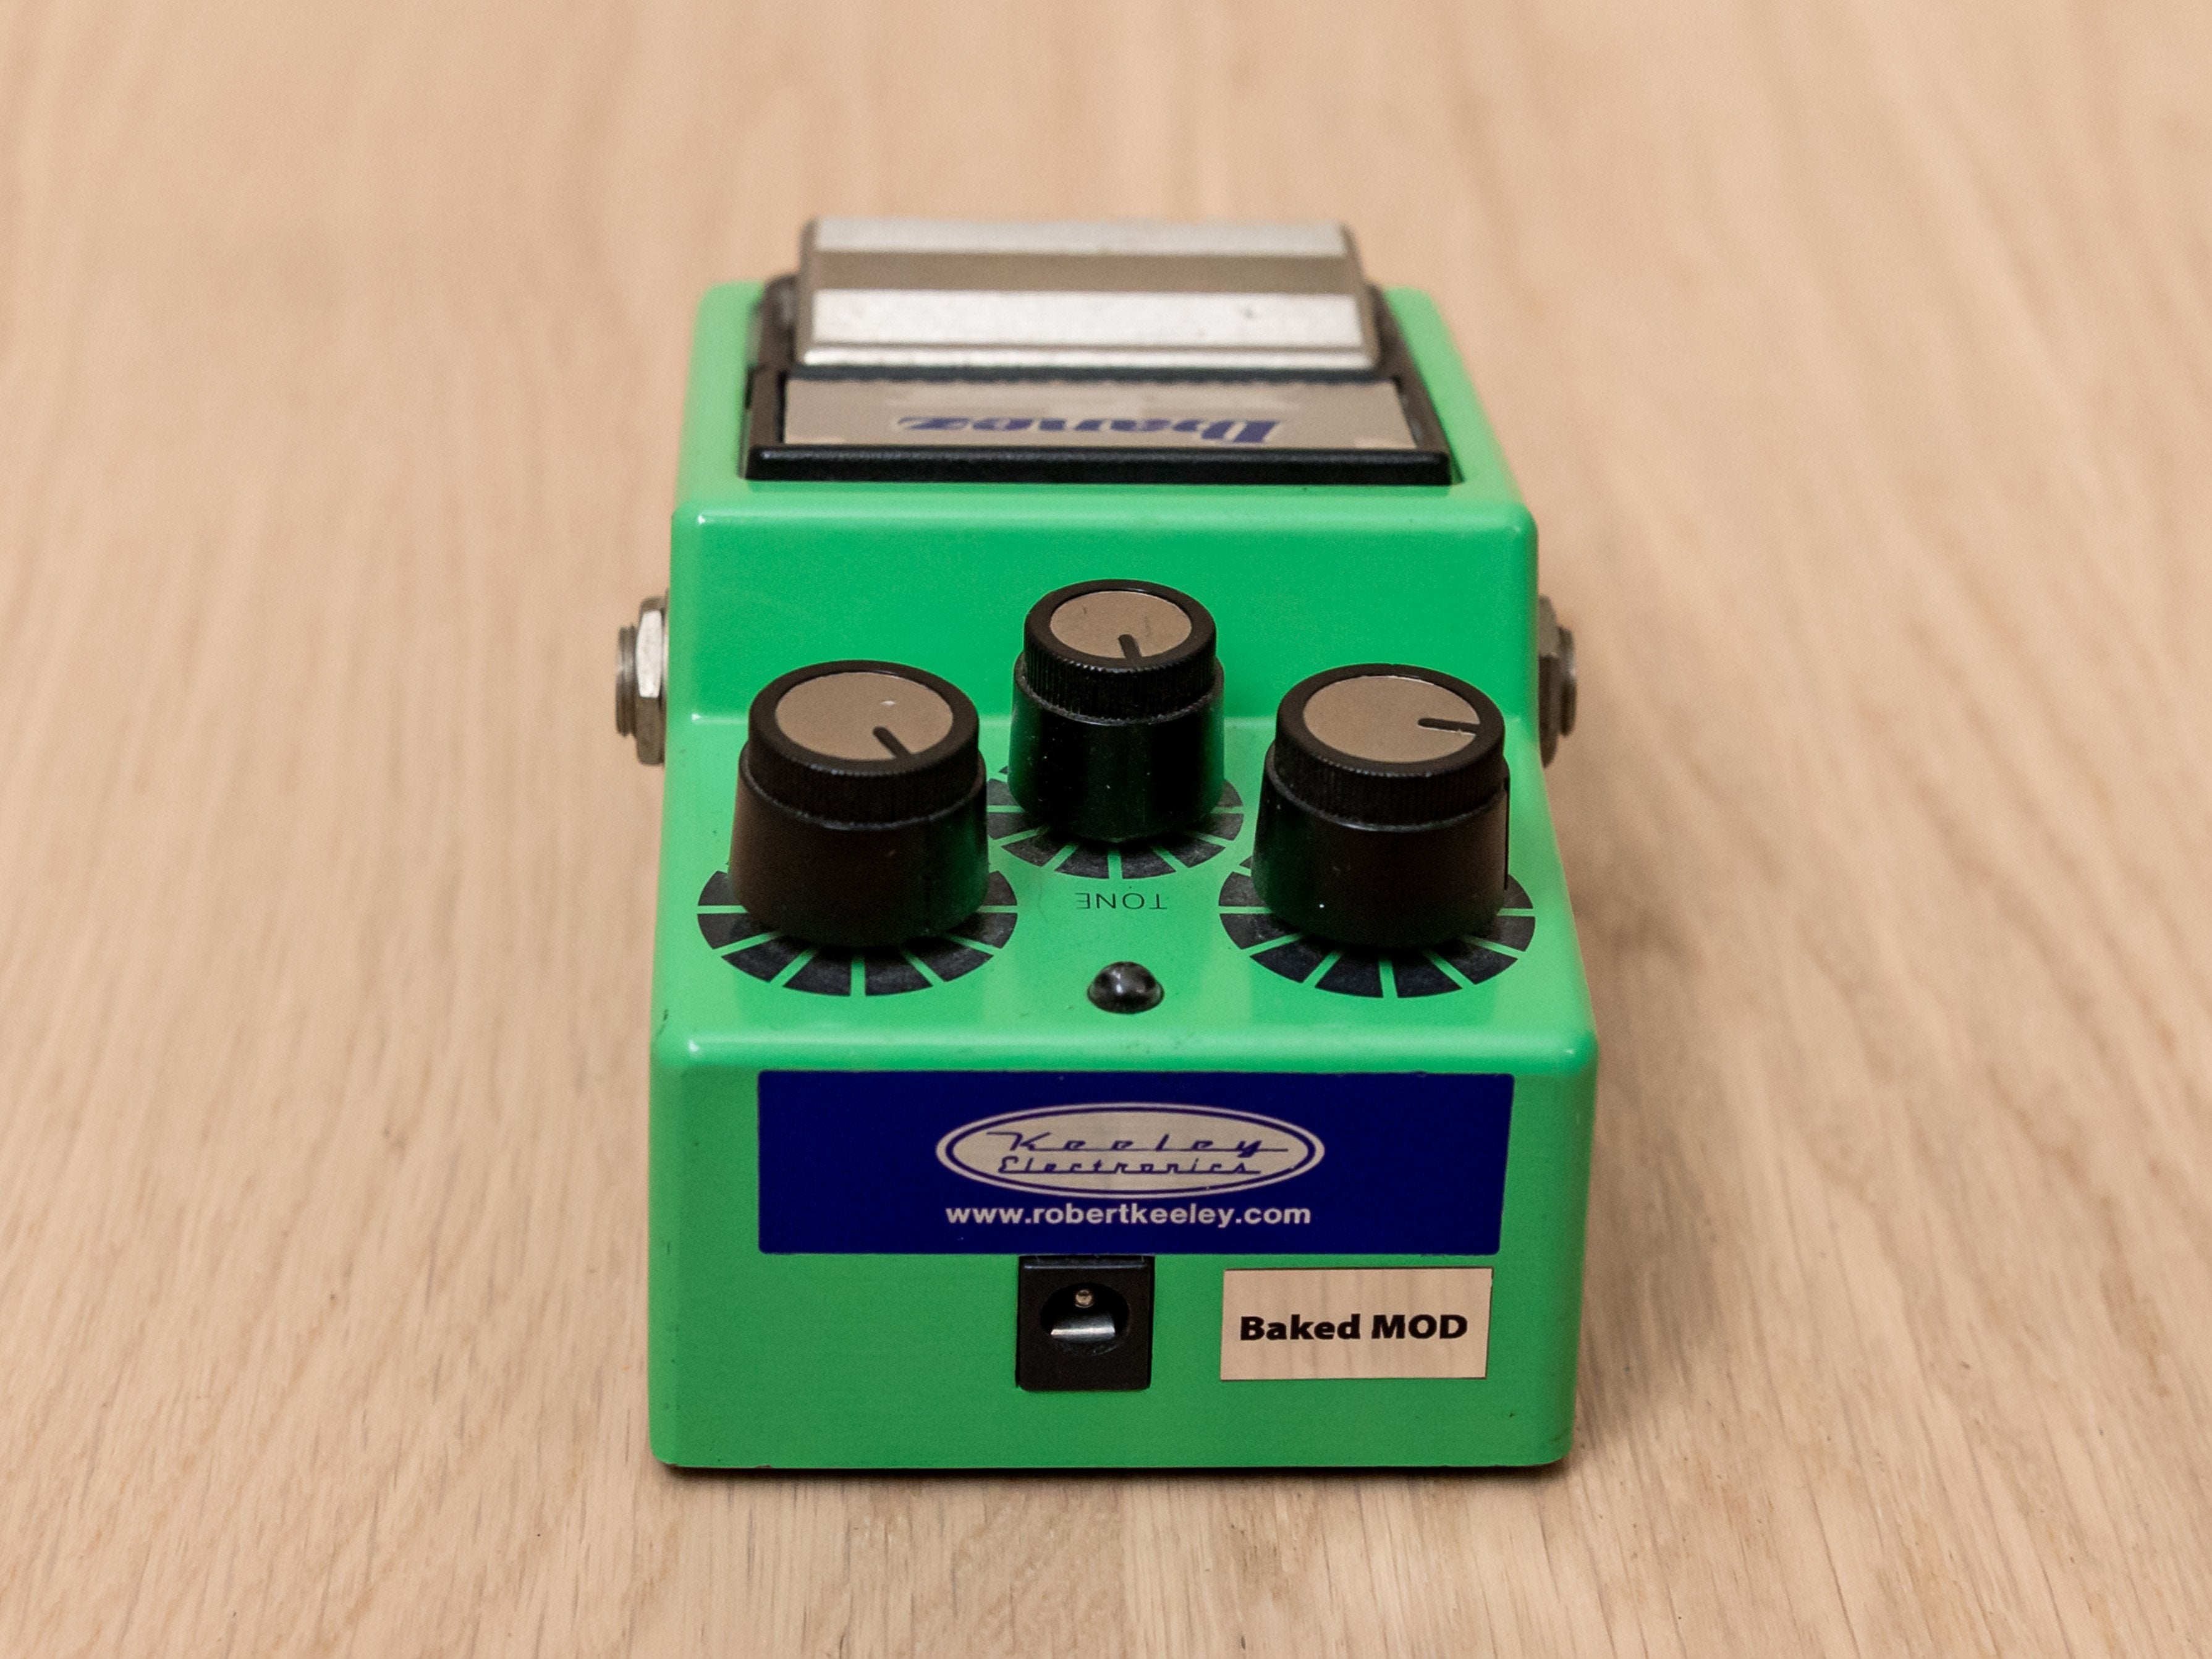 Ibanez TS9 Tube Screamer Keeley Baked Mod Overdrive Guitar Effects Pedal